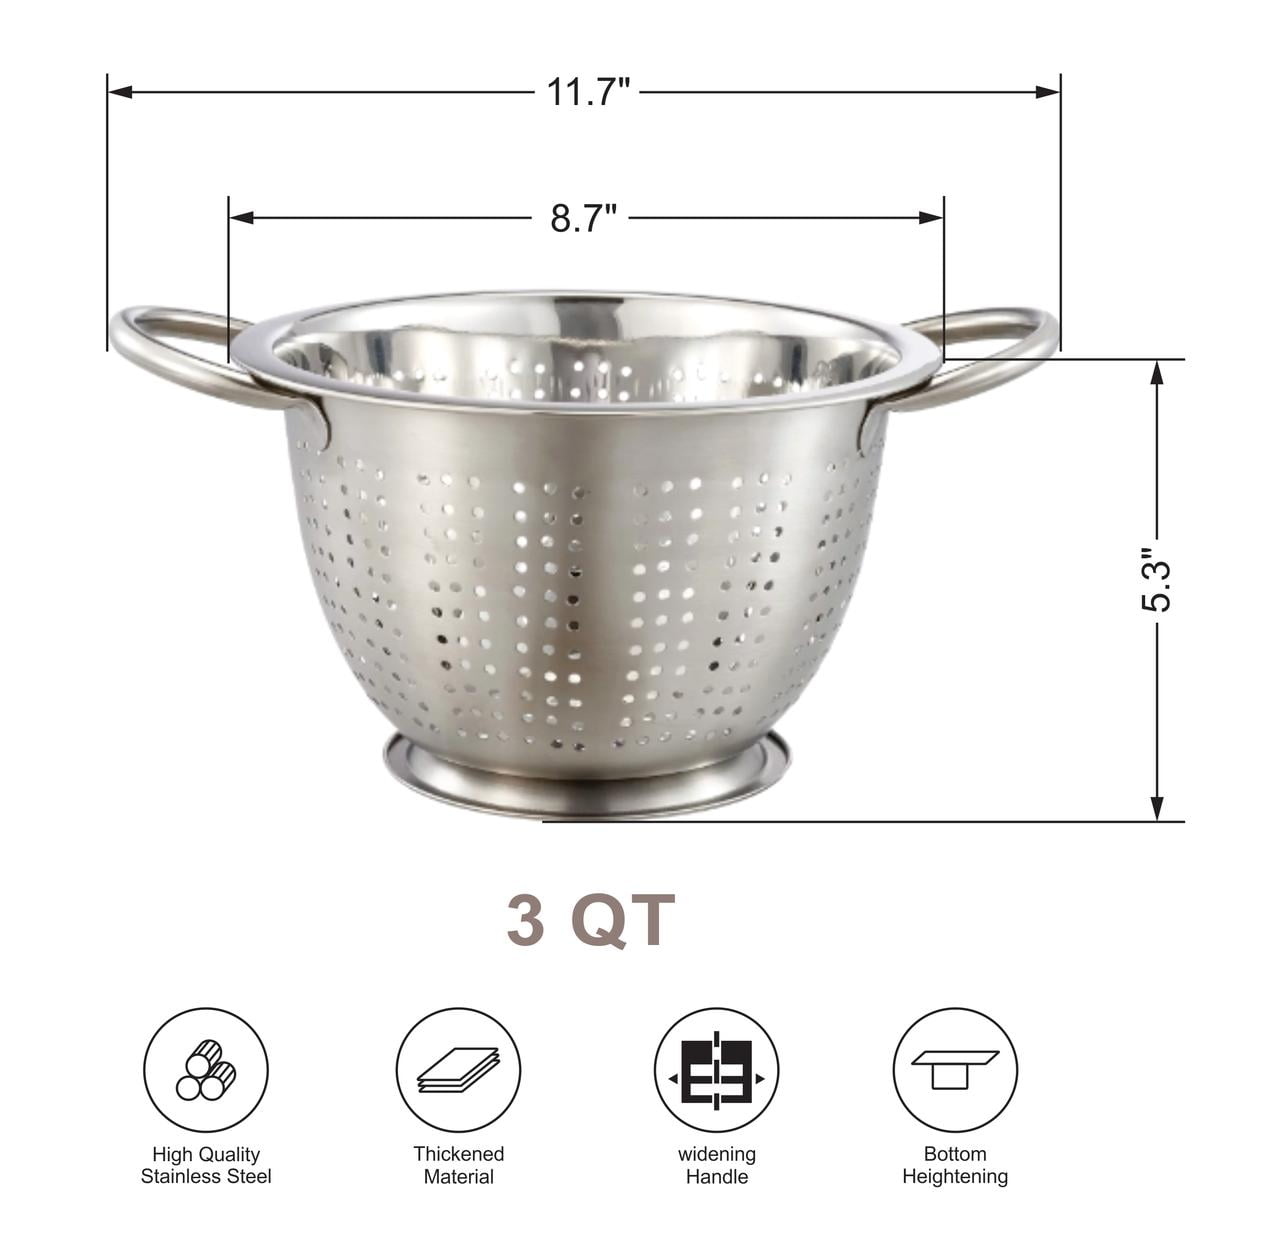 Priority Chef PriorityChef Colander, Stainless Steel 3 Qrt Kitchen Strainer  With Large Stable Base